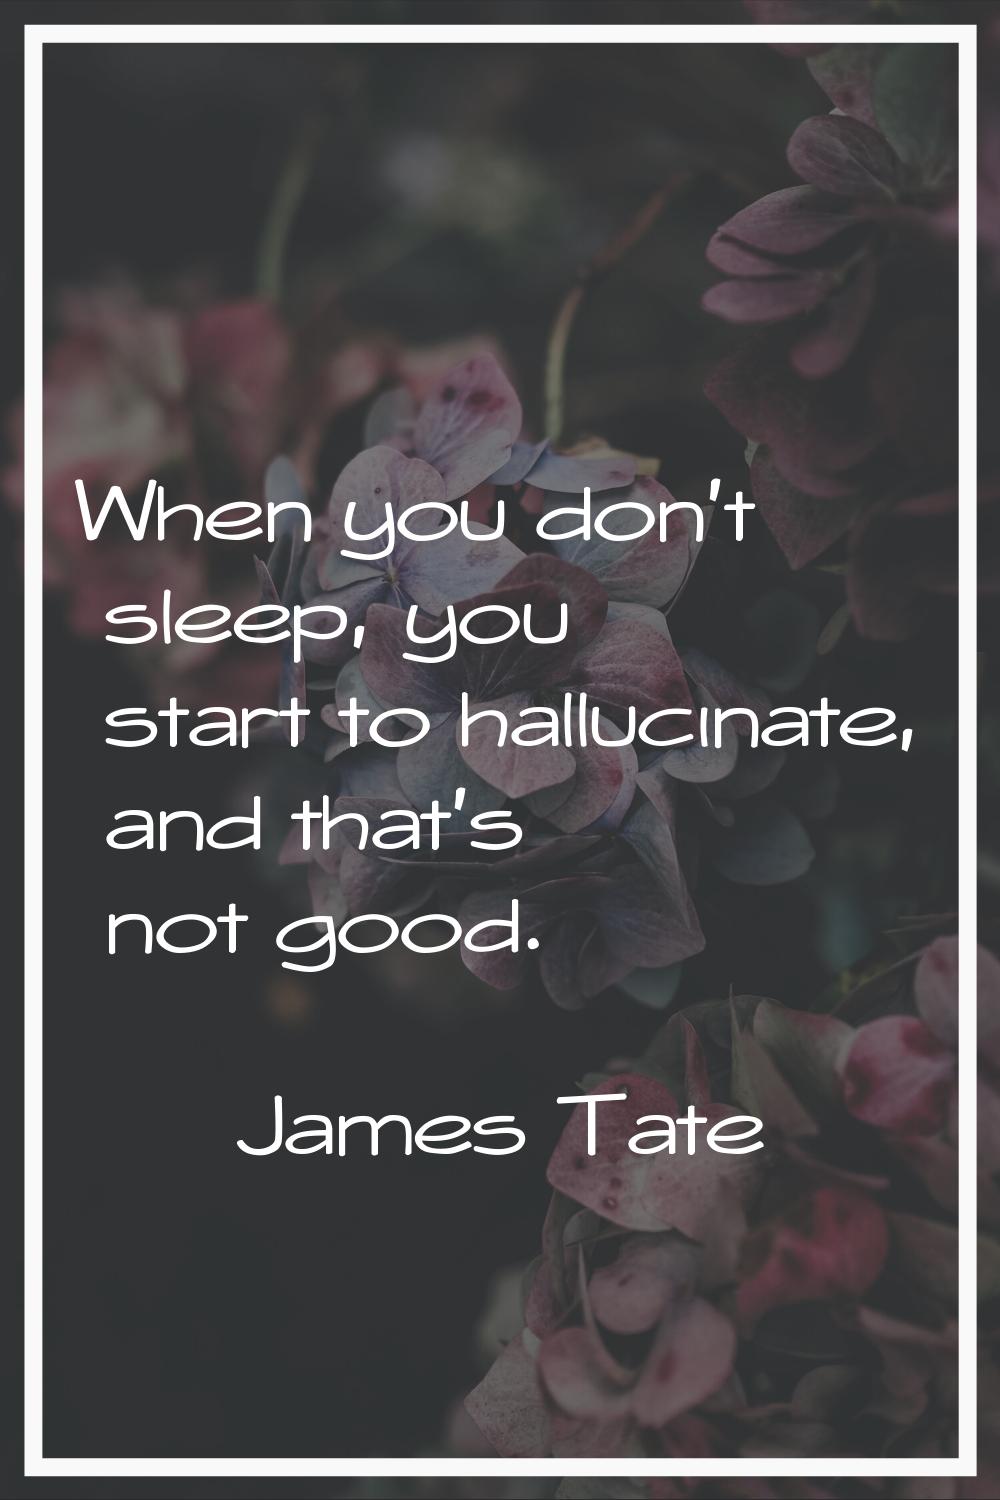 When you don't sleep, you start to hallucinate, and that's not good.